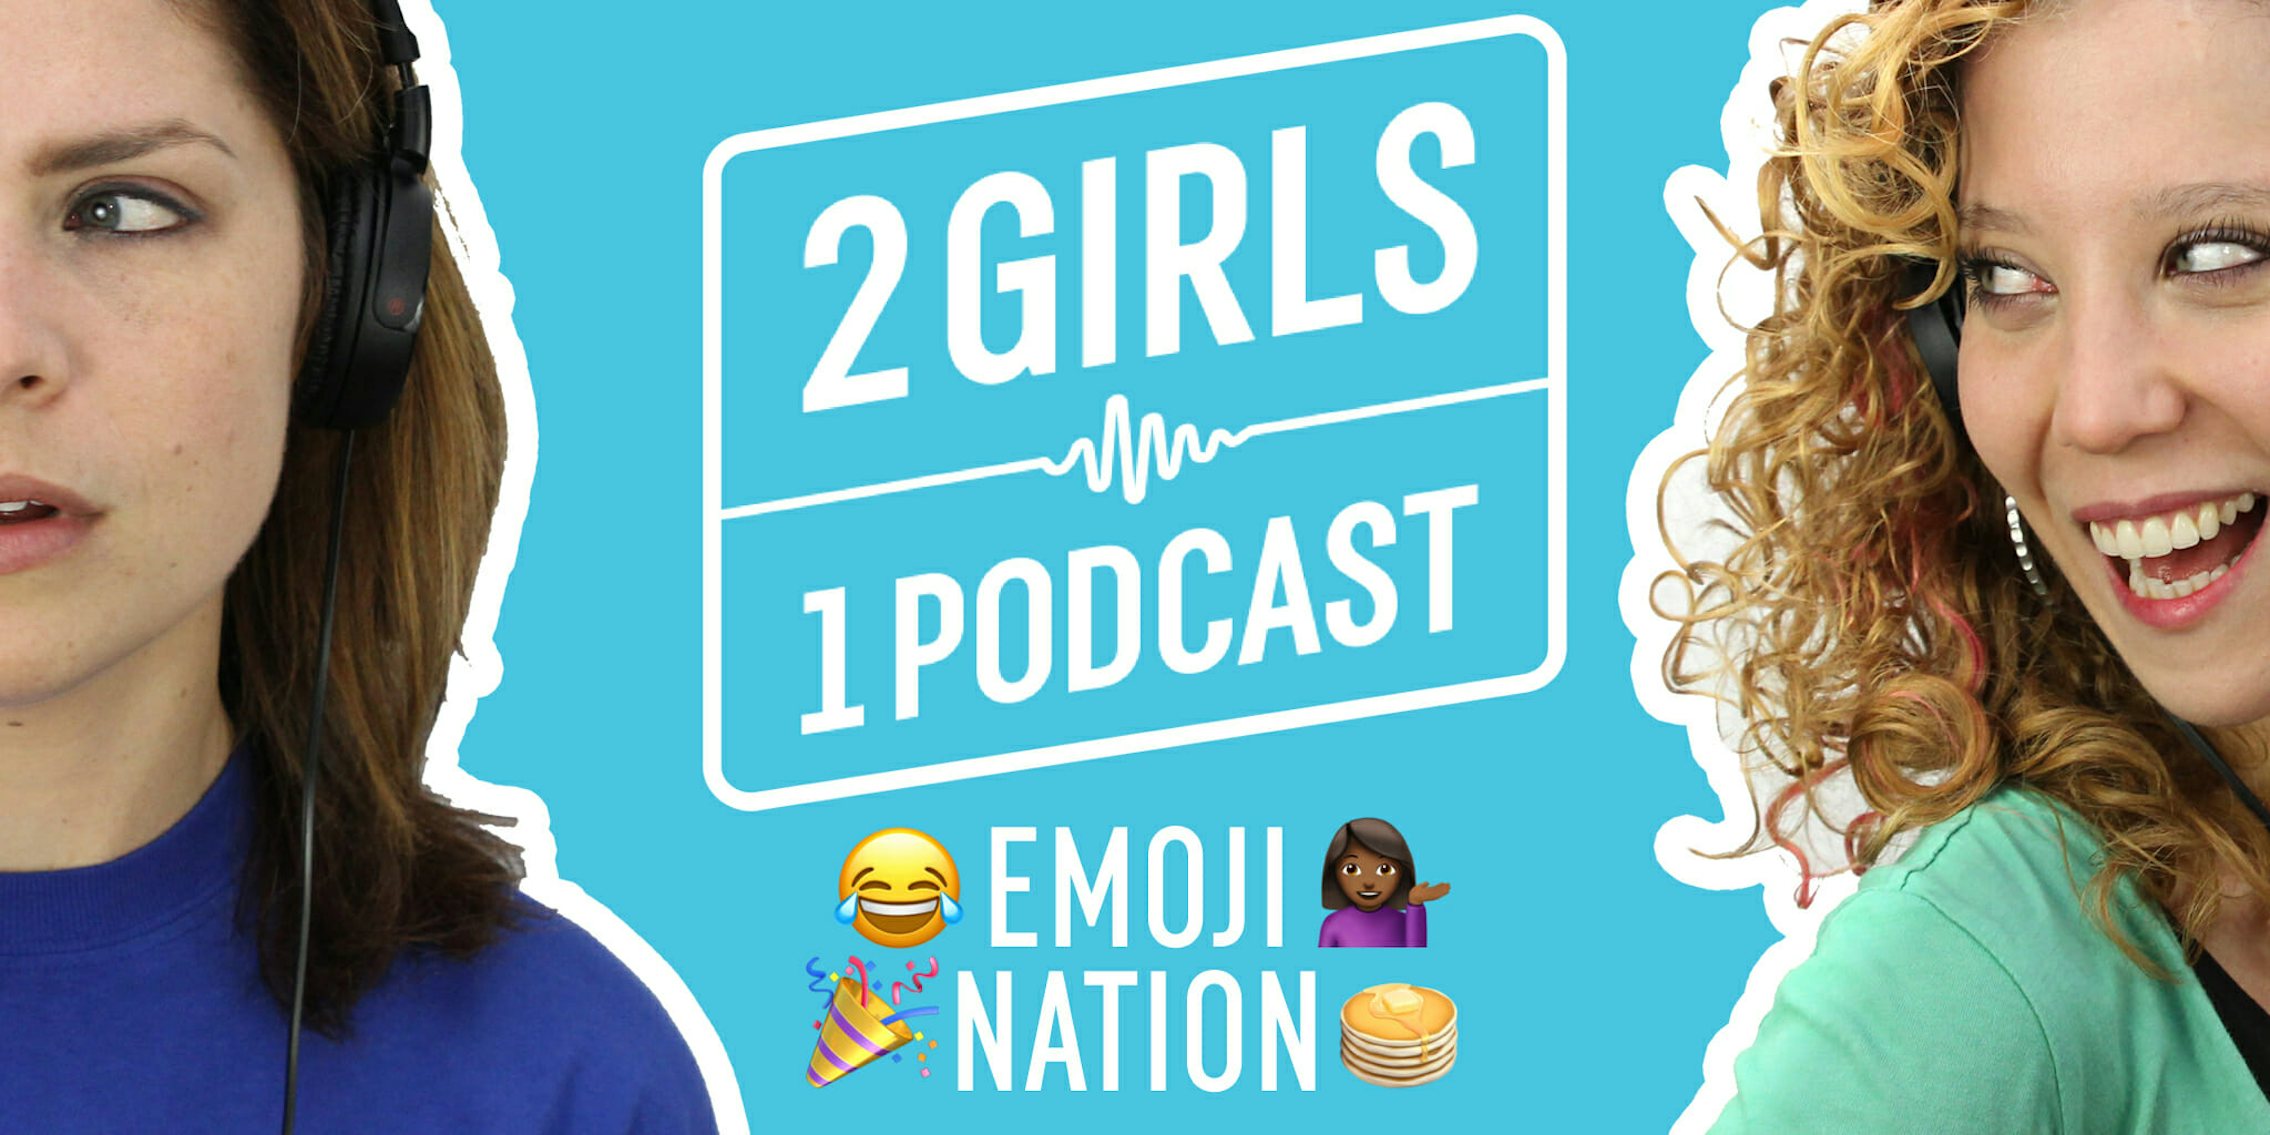 2 Girls 1 Podcast: Emojination and the Quest for Better Emoji